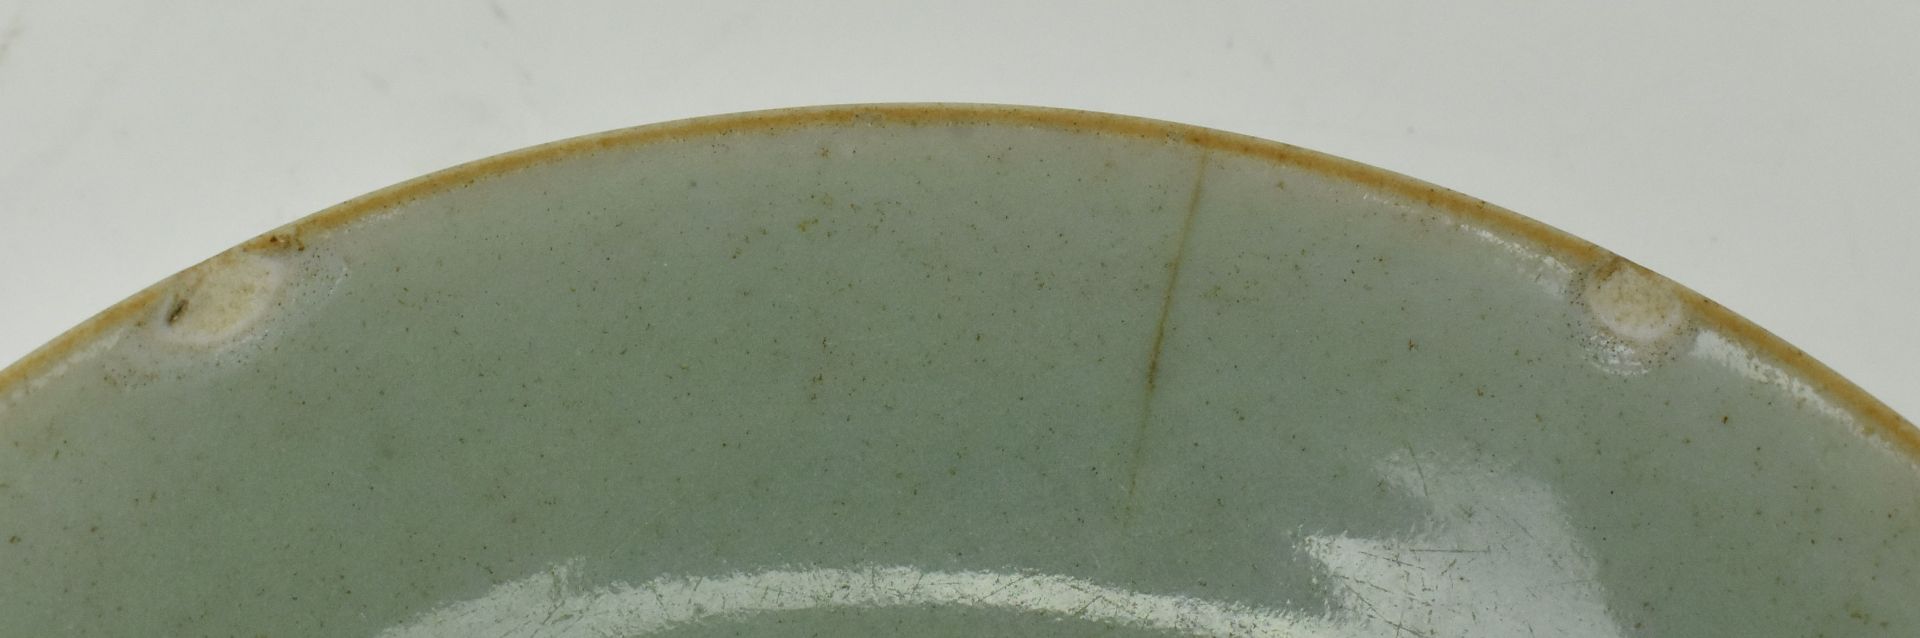 TWO QING DYNASTY CELADON GLAZED DISHES 清 青釉 盘子两个 - Image 6 of 7